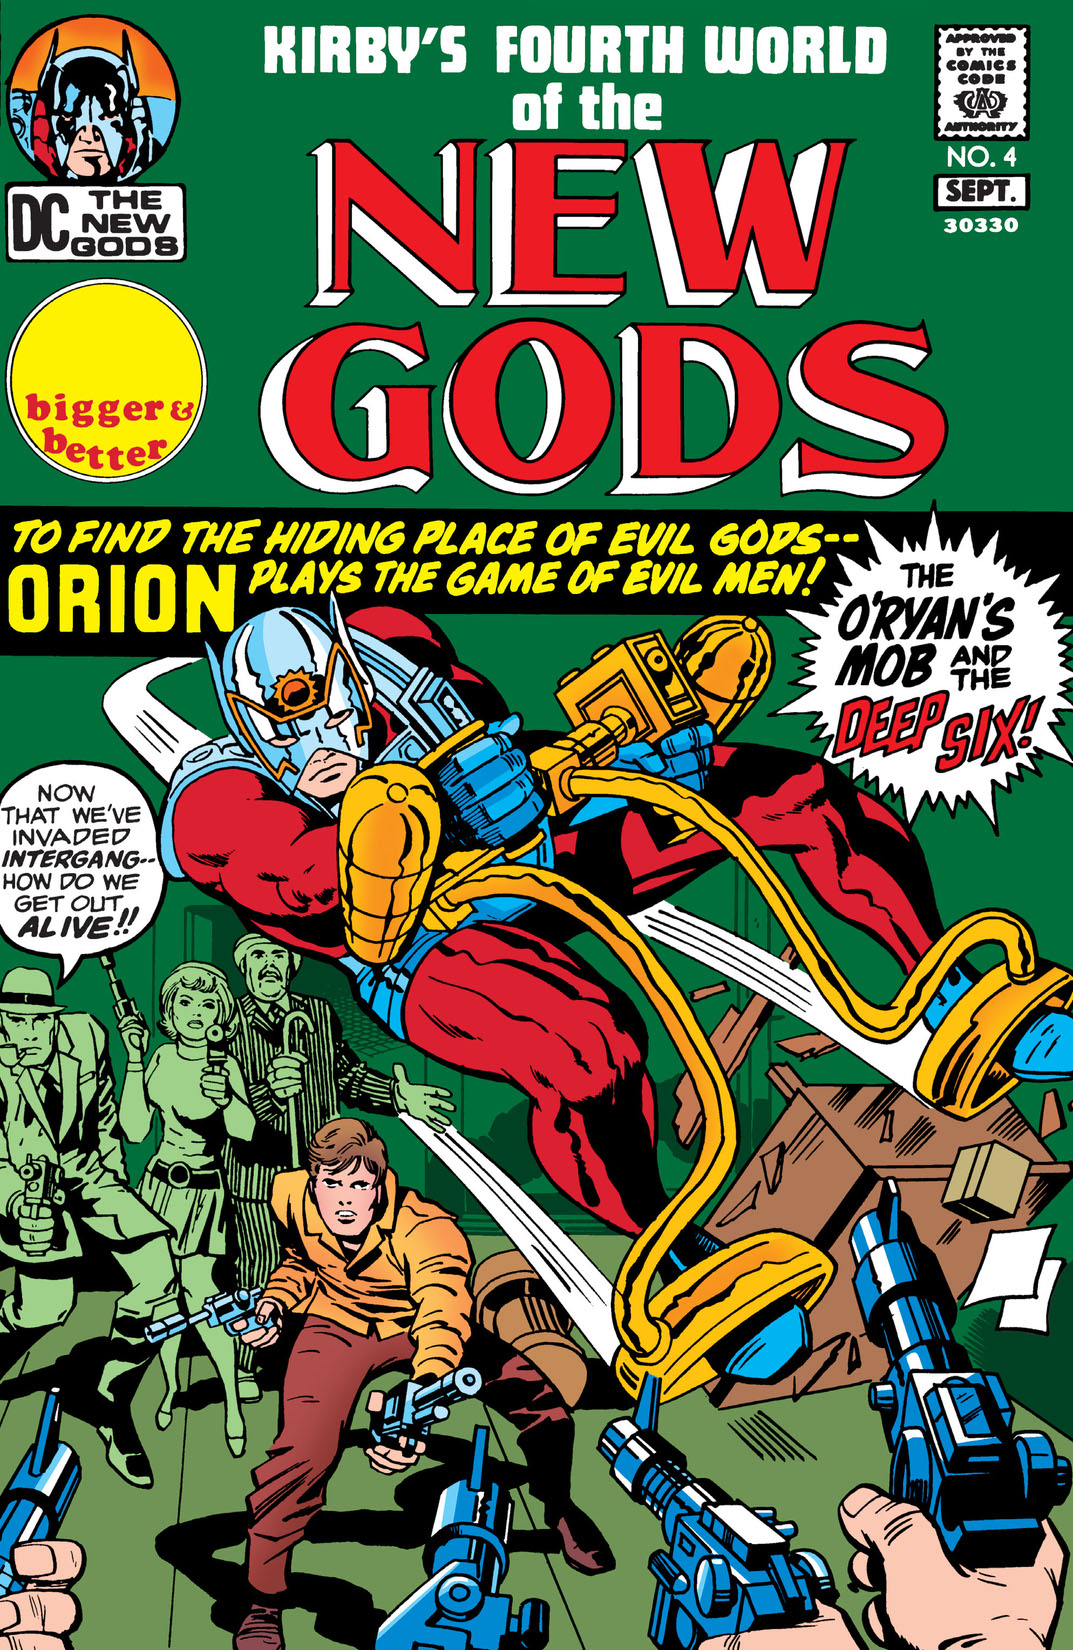 The New Gods #4 preview images